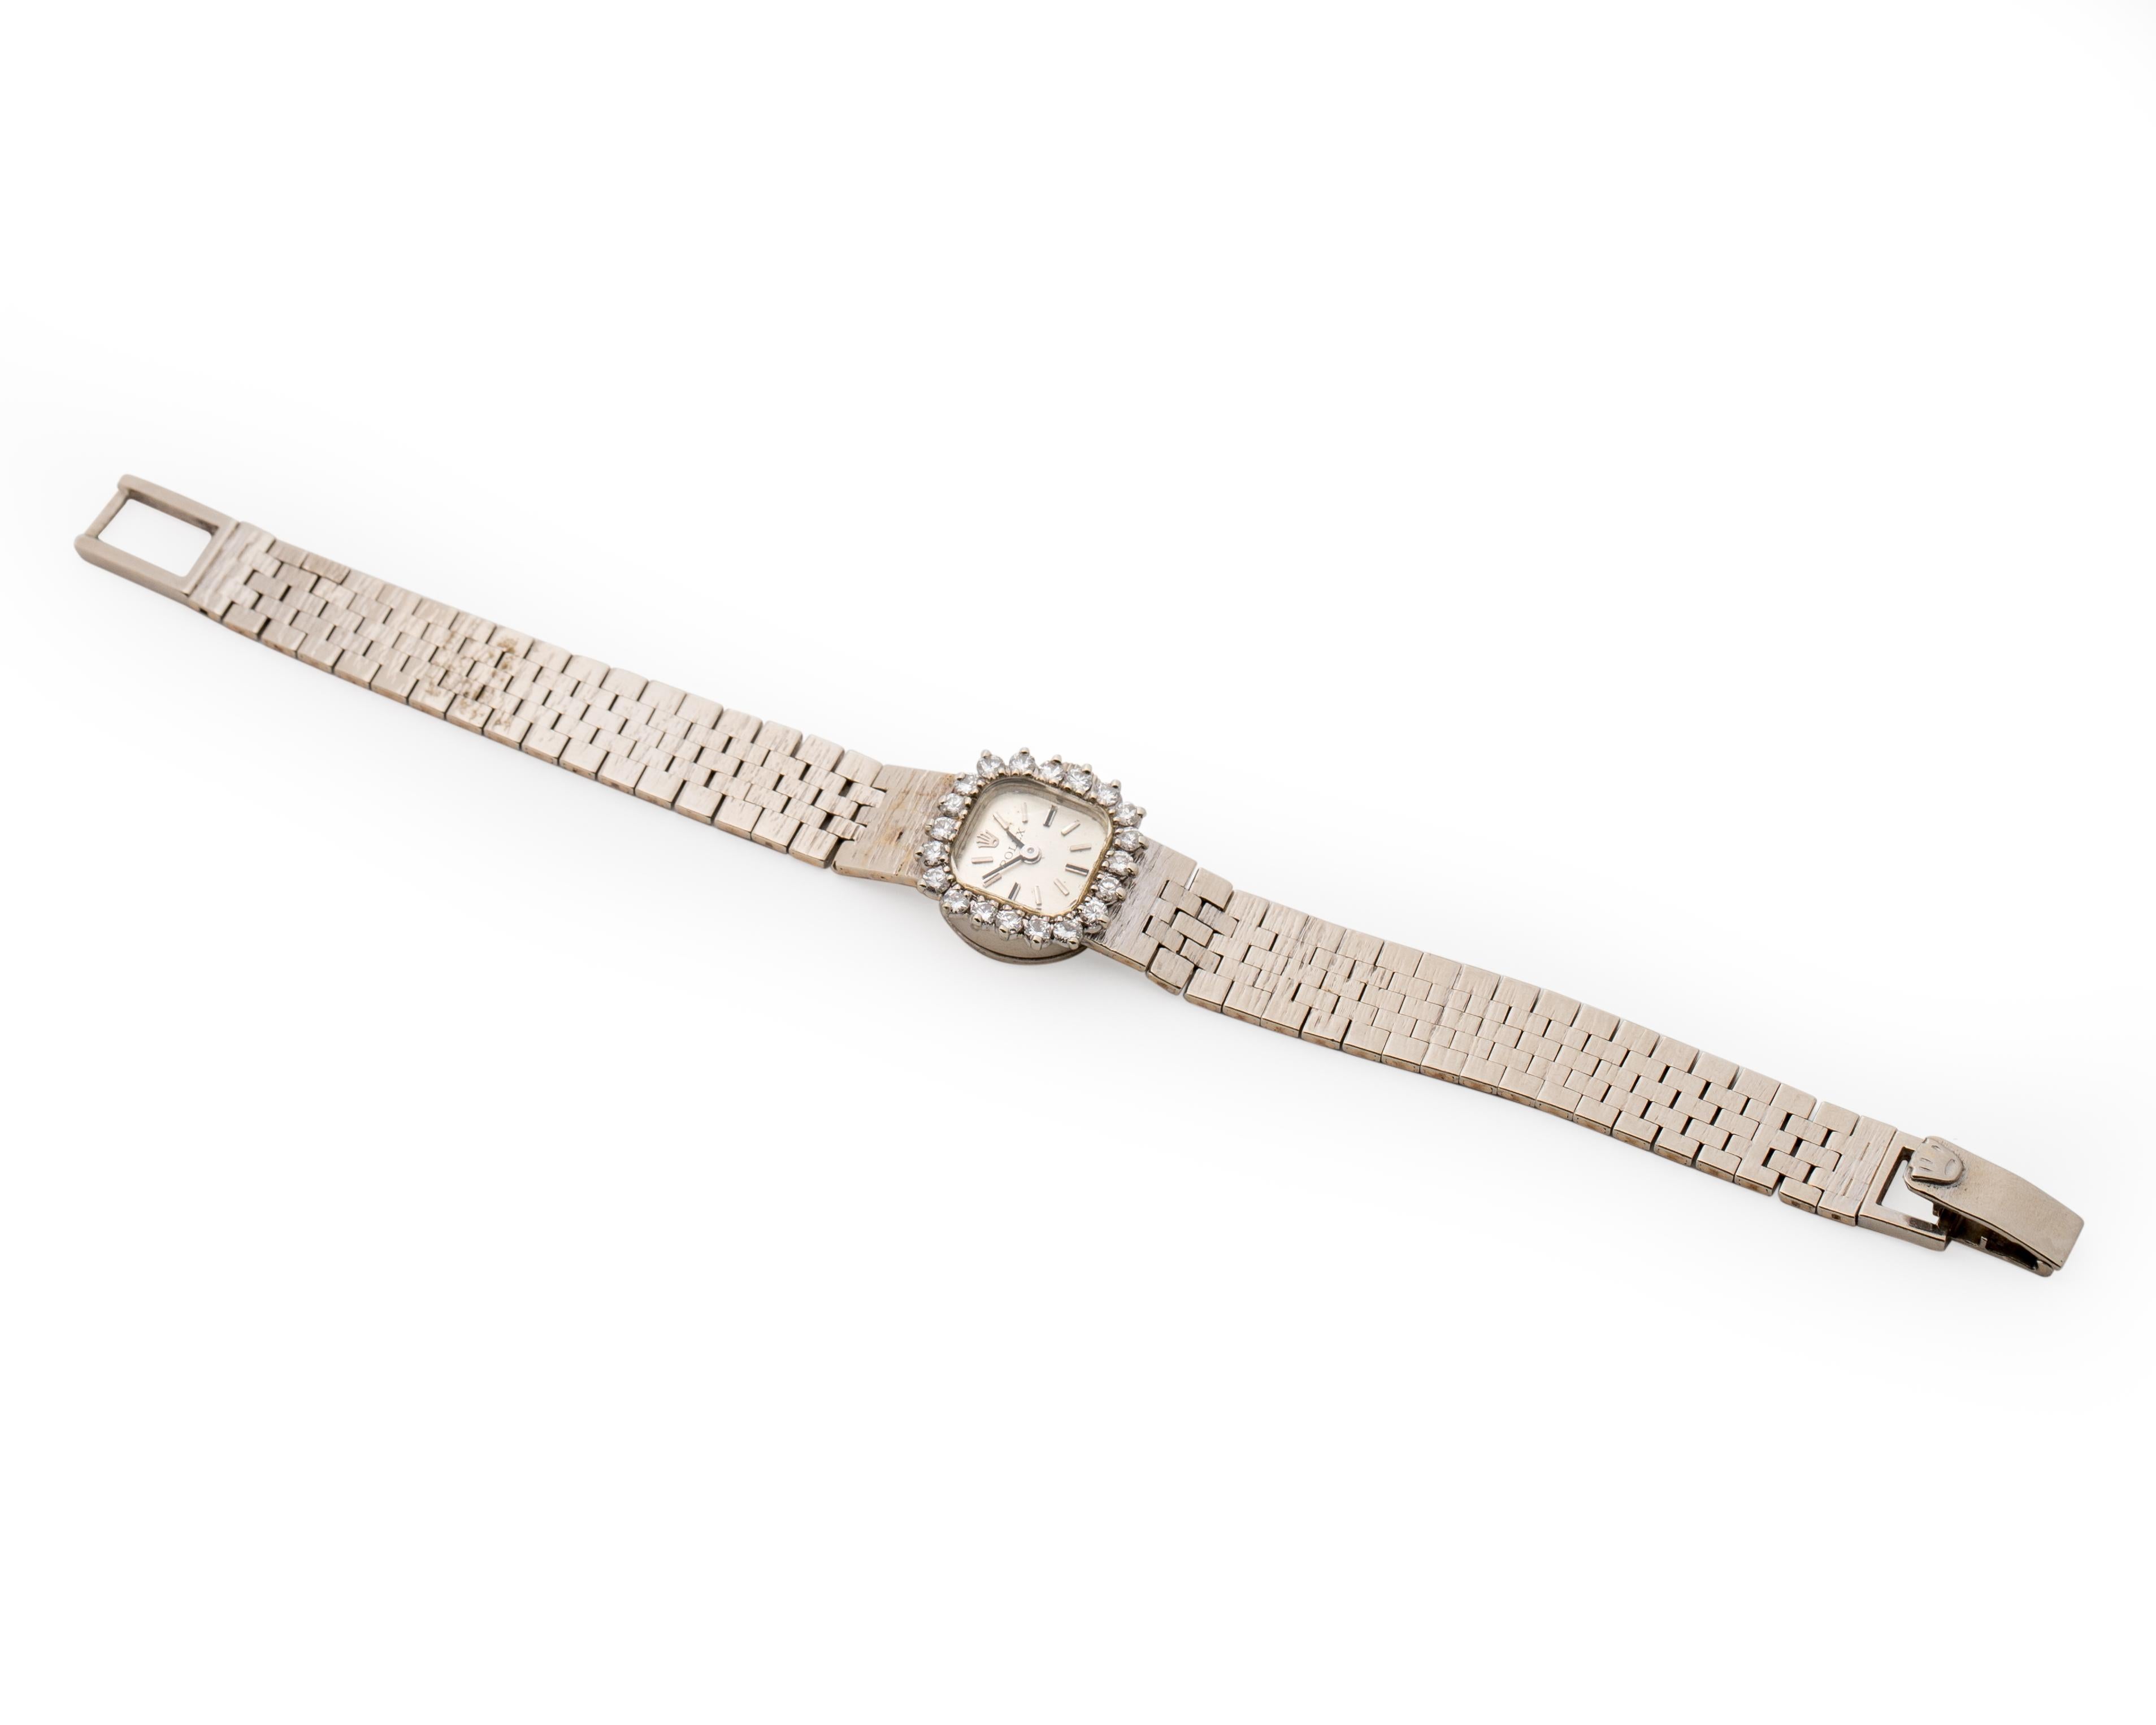 Item Details:
Metal type: 14 Karat White Gold
Weight: 25 grams
Measures: 7 Inch Bracelet 

Watch Details:
Womens Wristwatch
Dainty yet chic 
1950s
Florentine finish on the bracelet 
The watch features a diamond halo with . 35 carats of diamonds